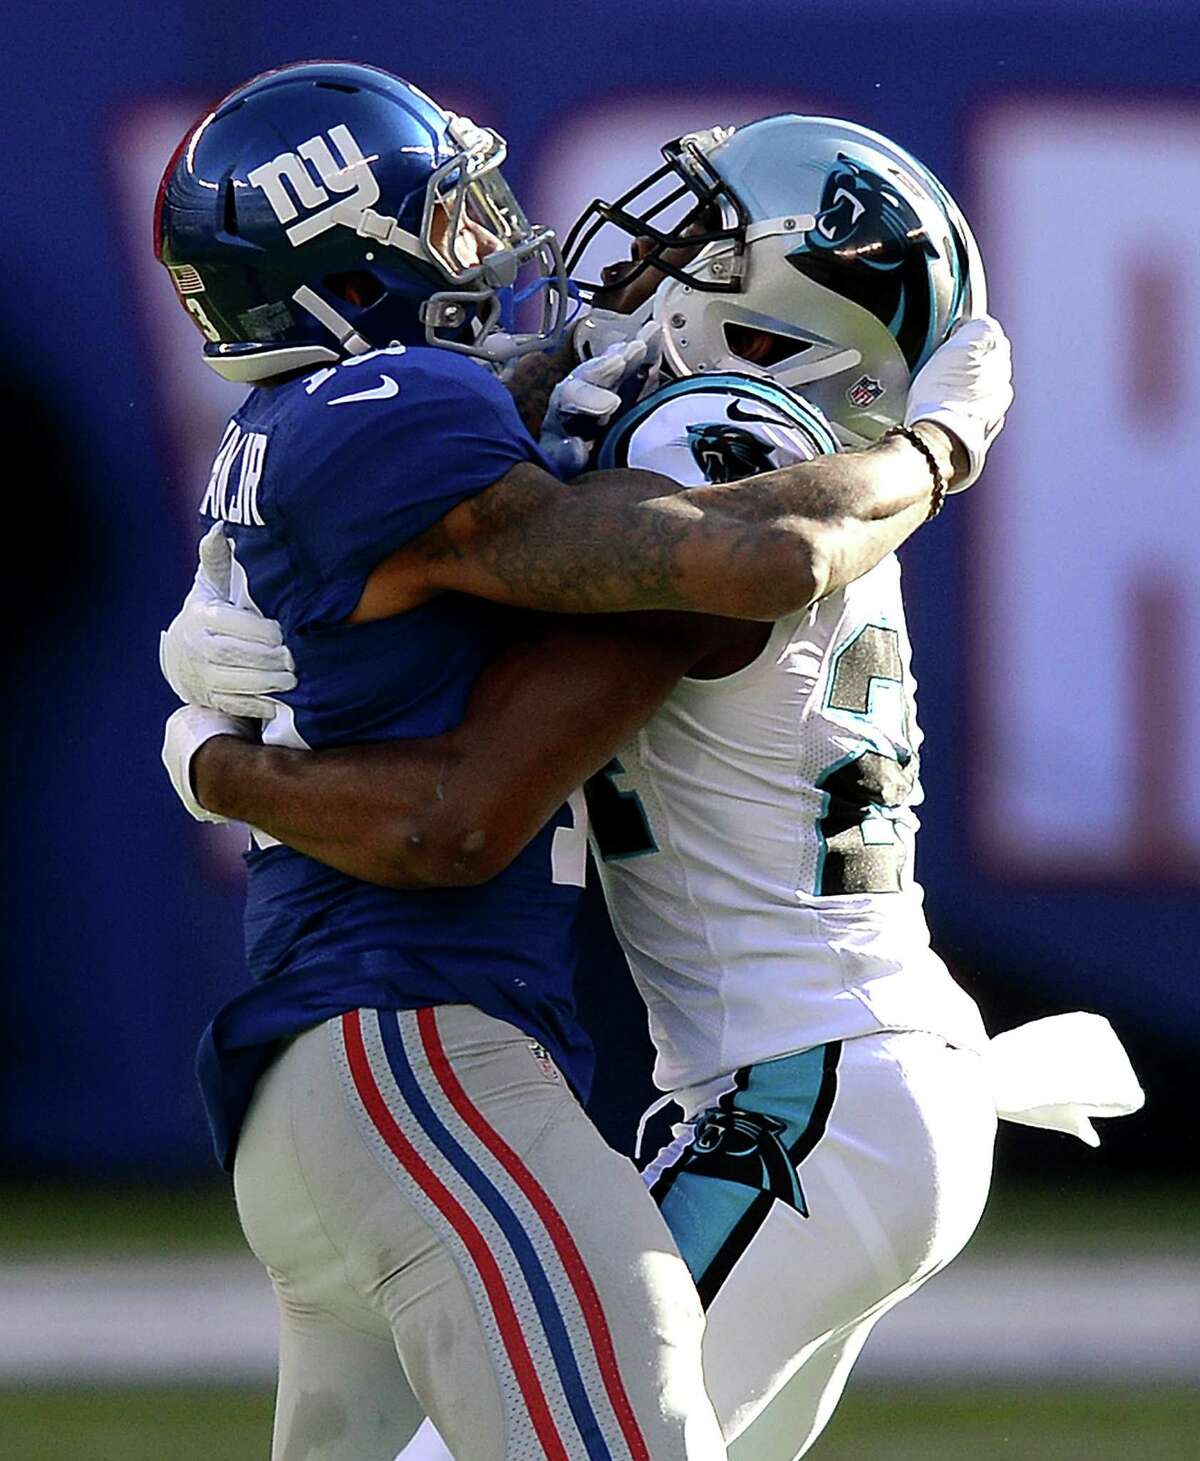 New York Giants wide receiver Odell Beckham Jr., left, and Carolina Panthers cornerback Josh Norman, right, wrap one another up during first-quarter action at MetLife Stadium in East Rutherford, N.J., on Sunday, Dec. 20, 2015. The Panthers won, 38-35. (Jeff Siner/Charlotte Observer/TNS)